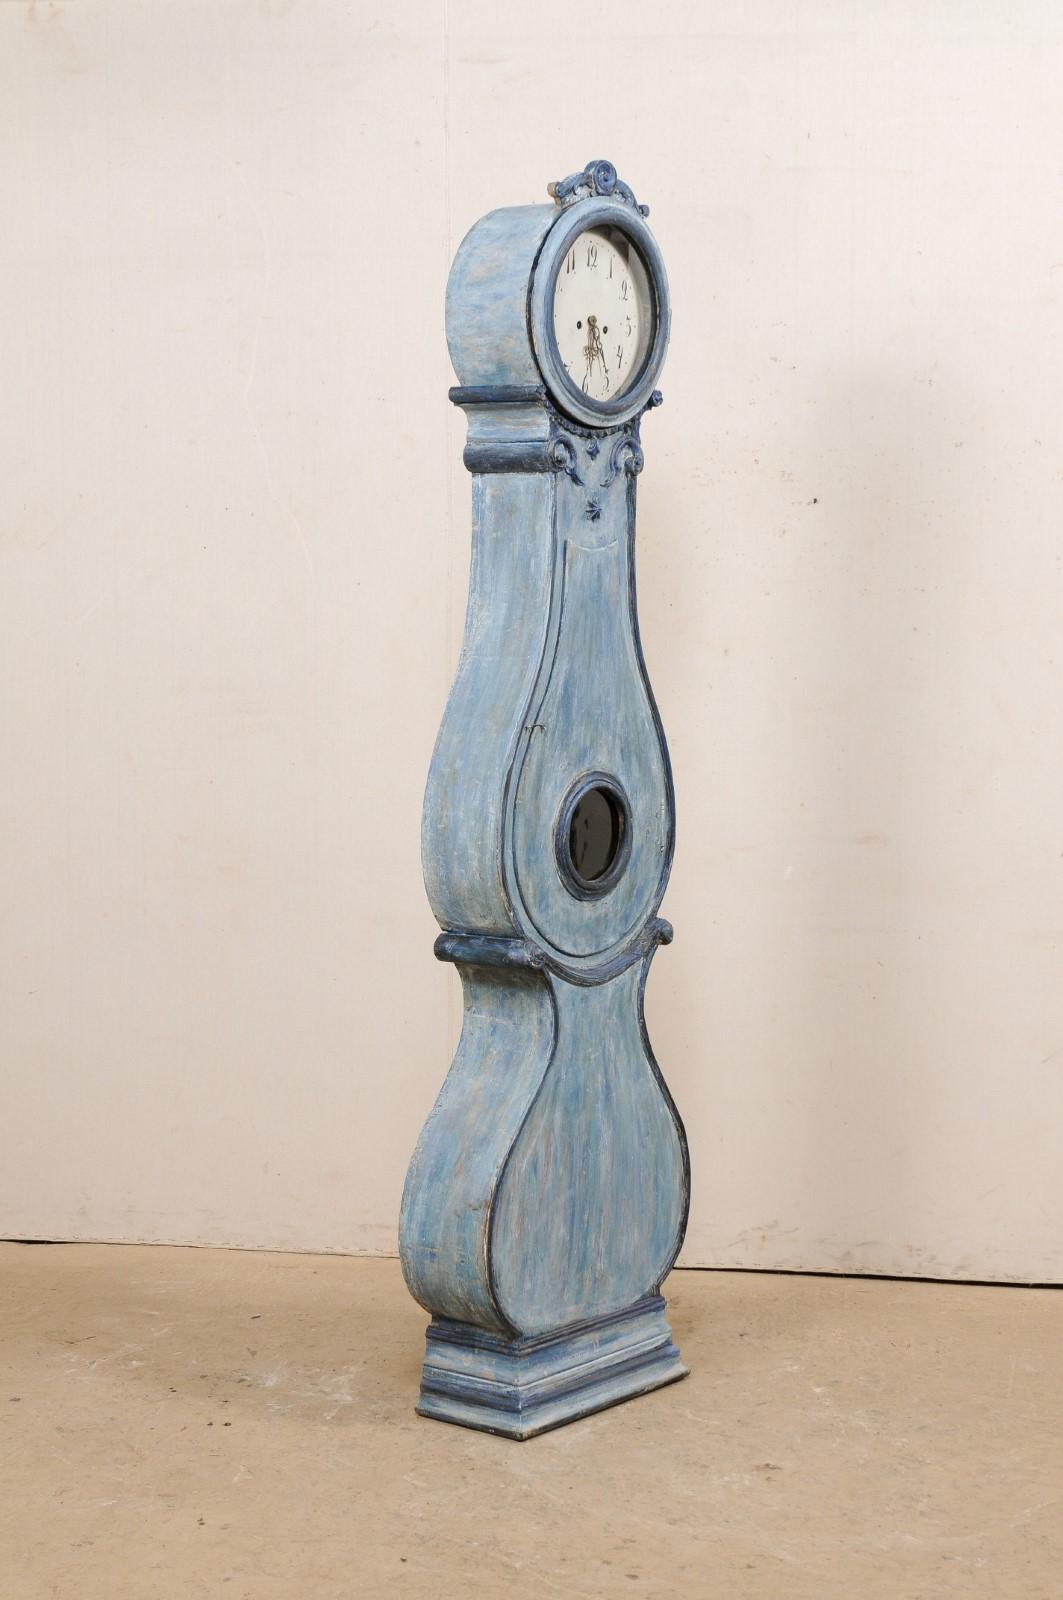 Antique Swedish Fryksdahl Grandfather Clock w/Shapely Body in Blue Hues 1